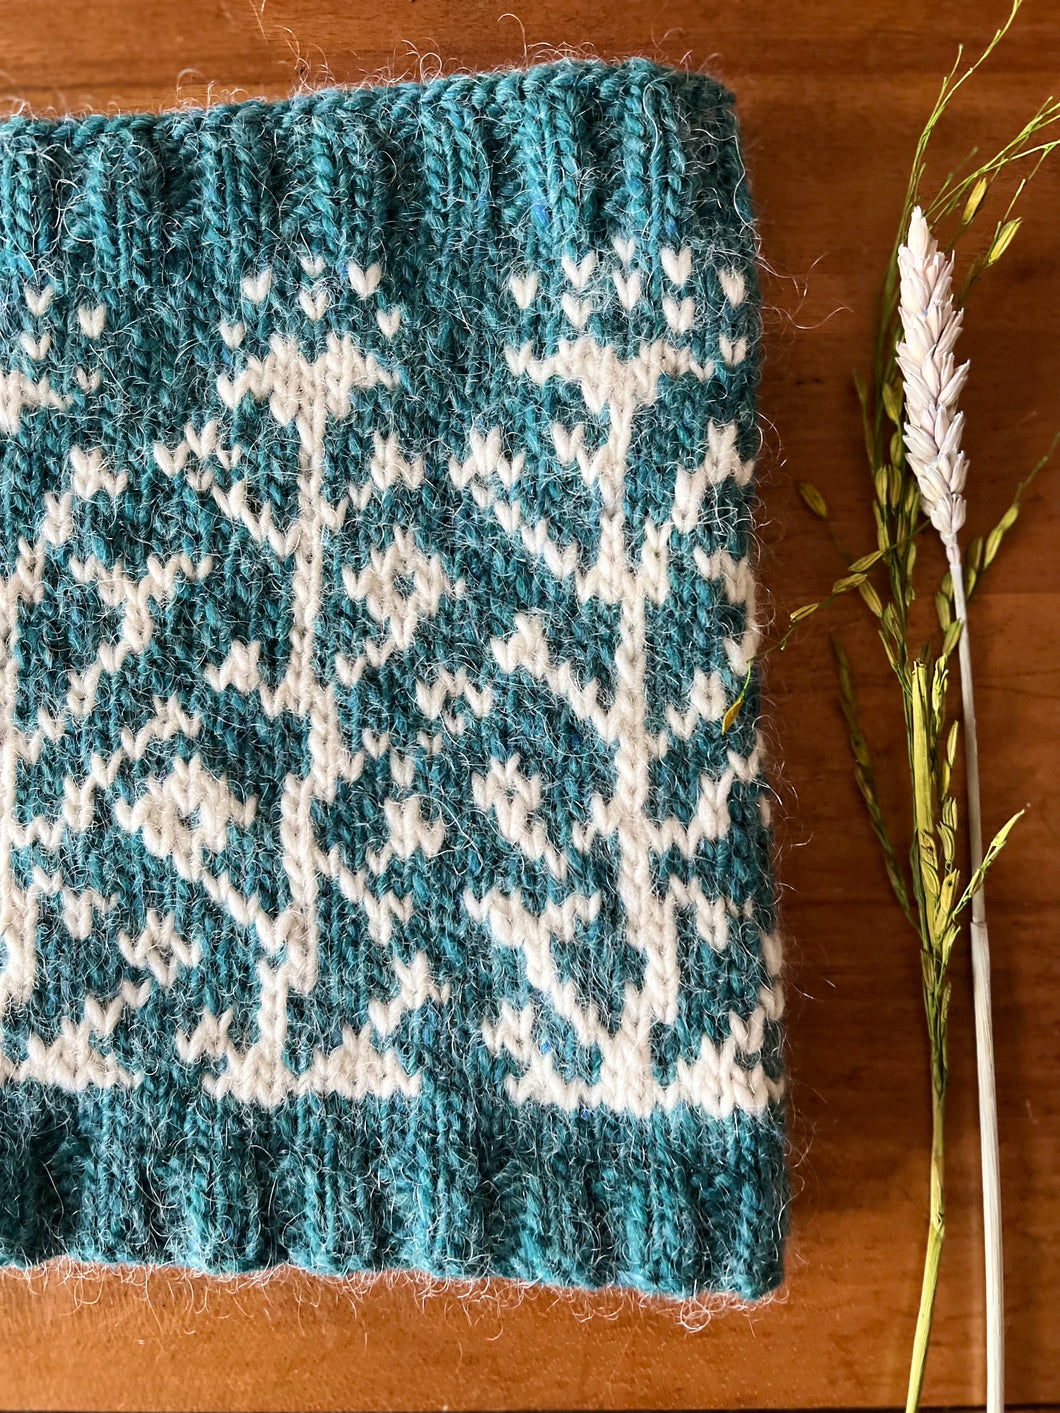 Vines Entwined Cowl - pattern only